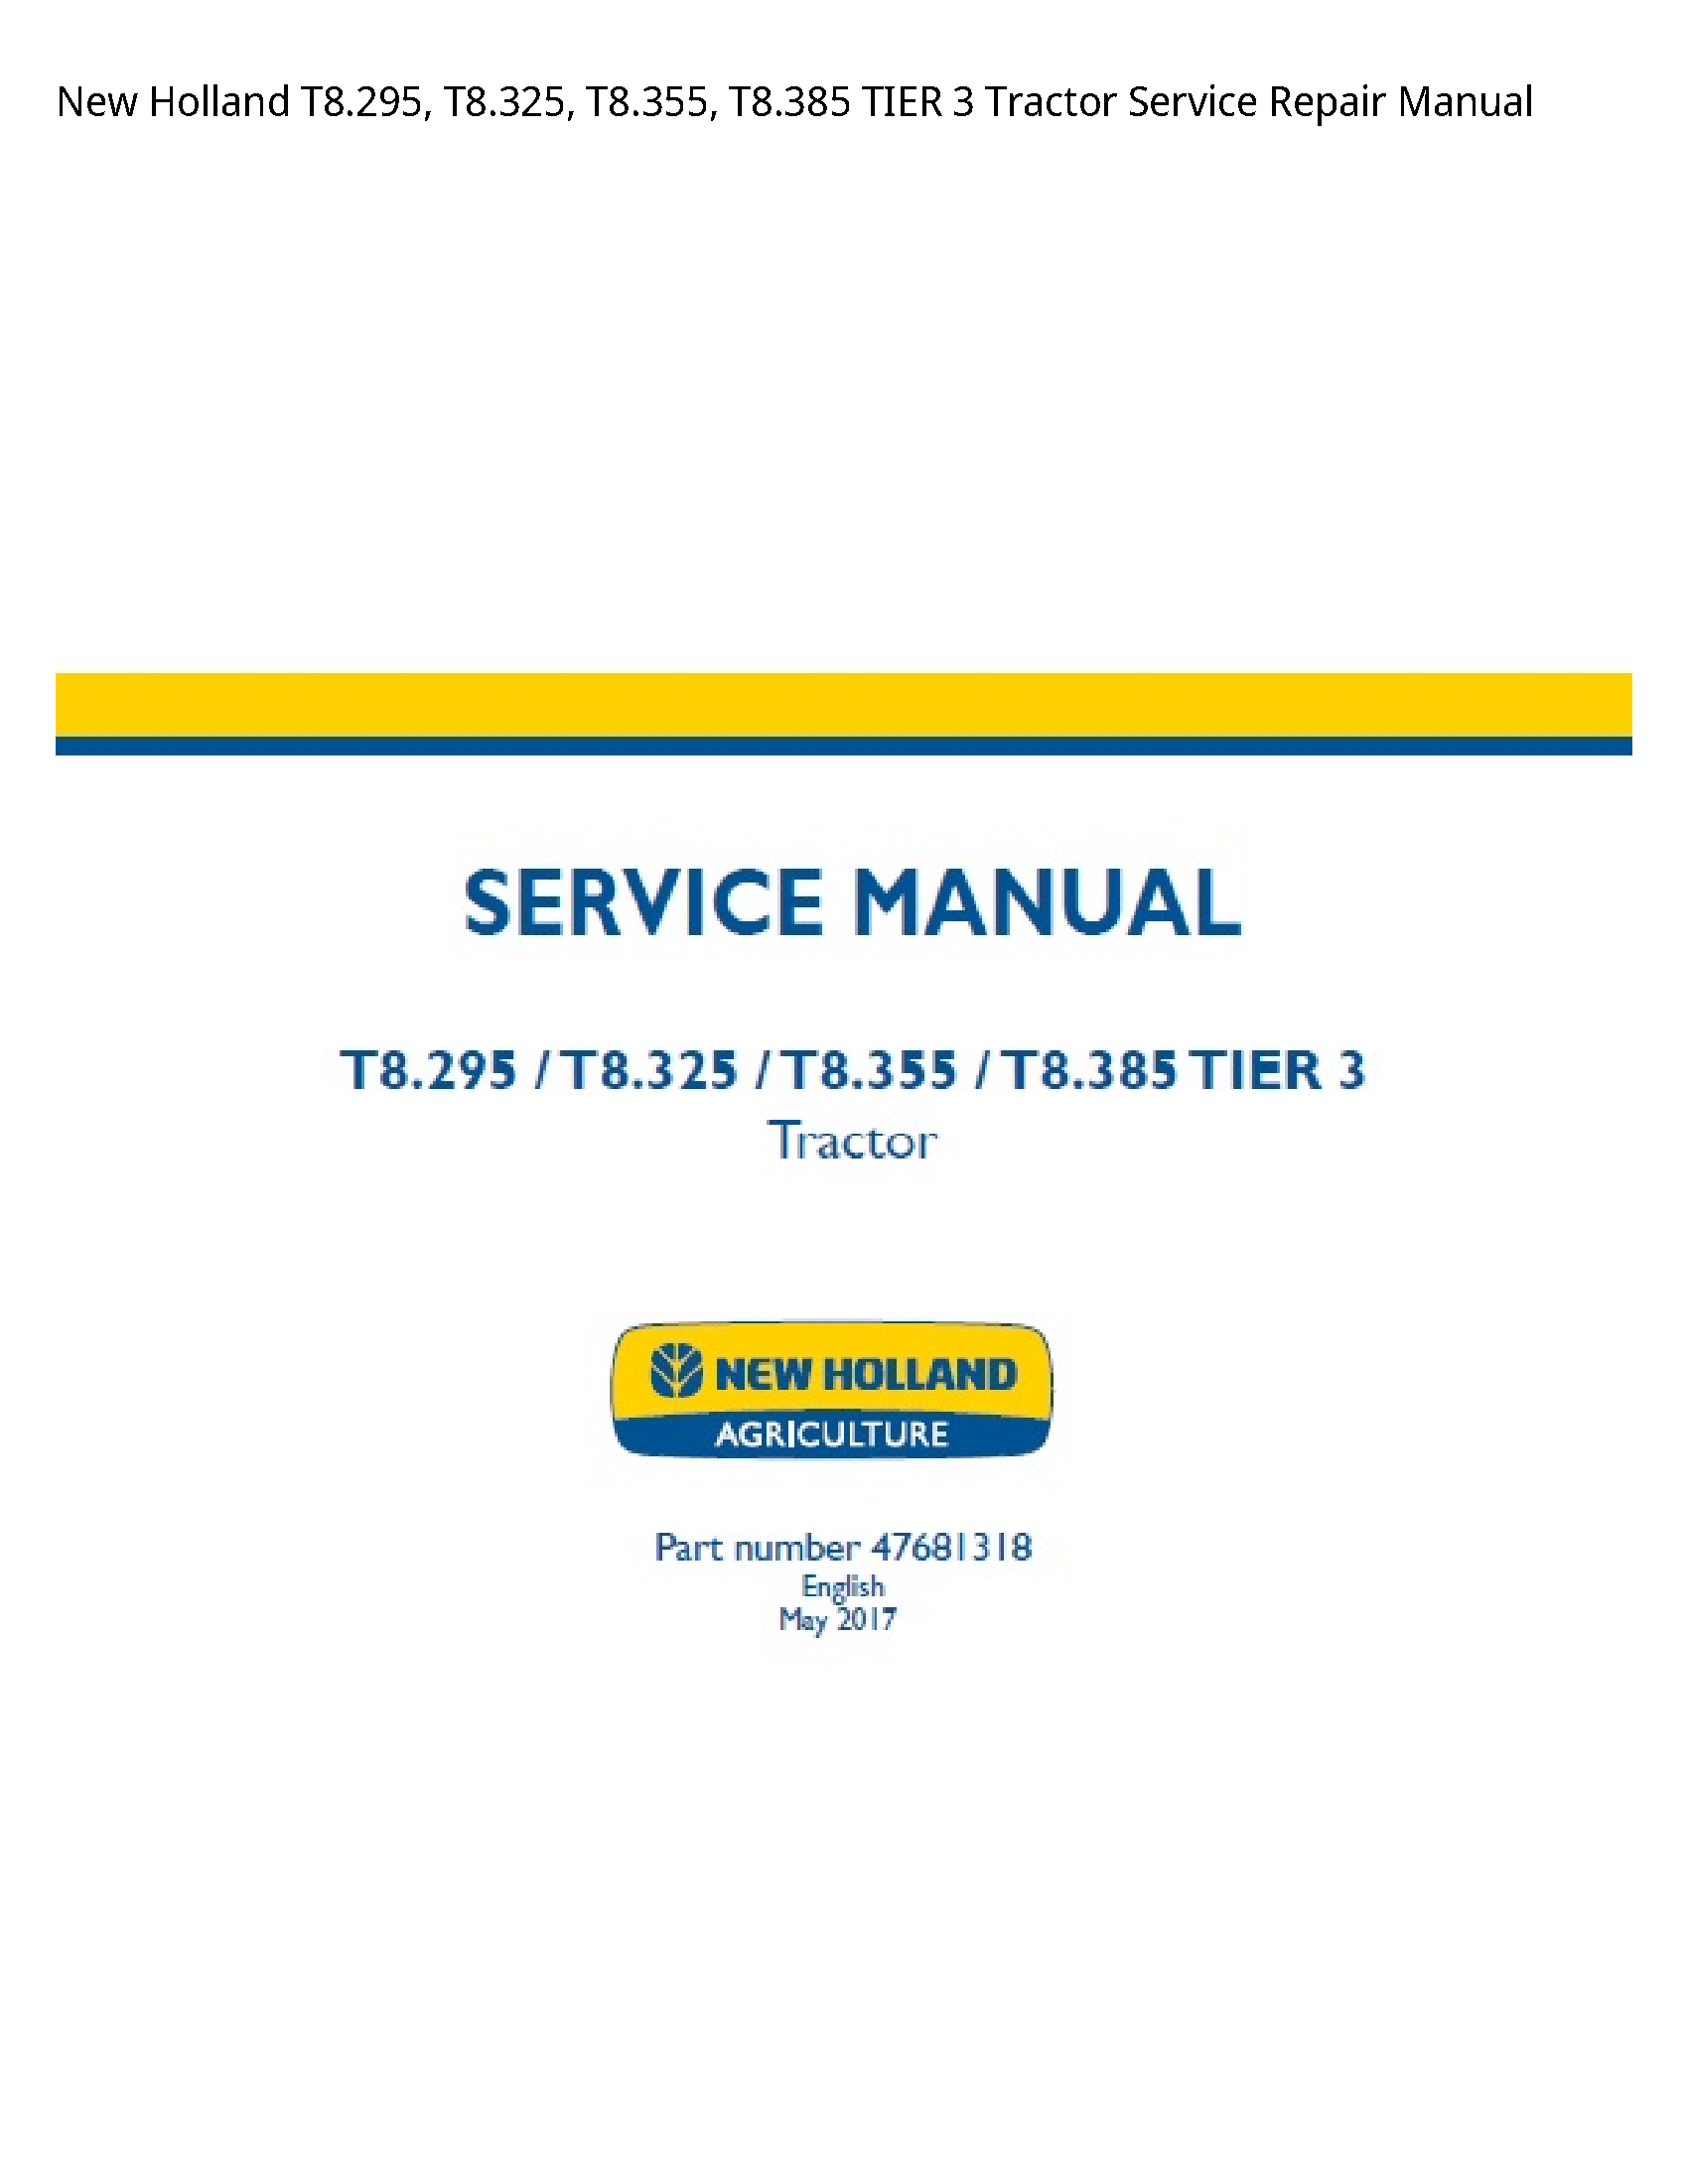 New Holland T8.295 TIER Tractor manual